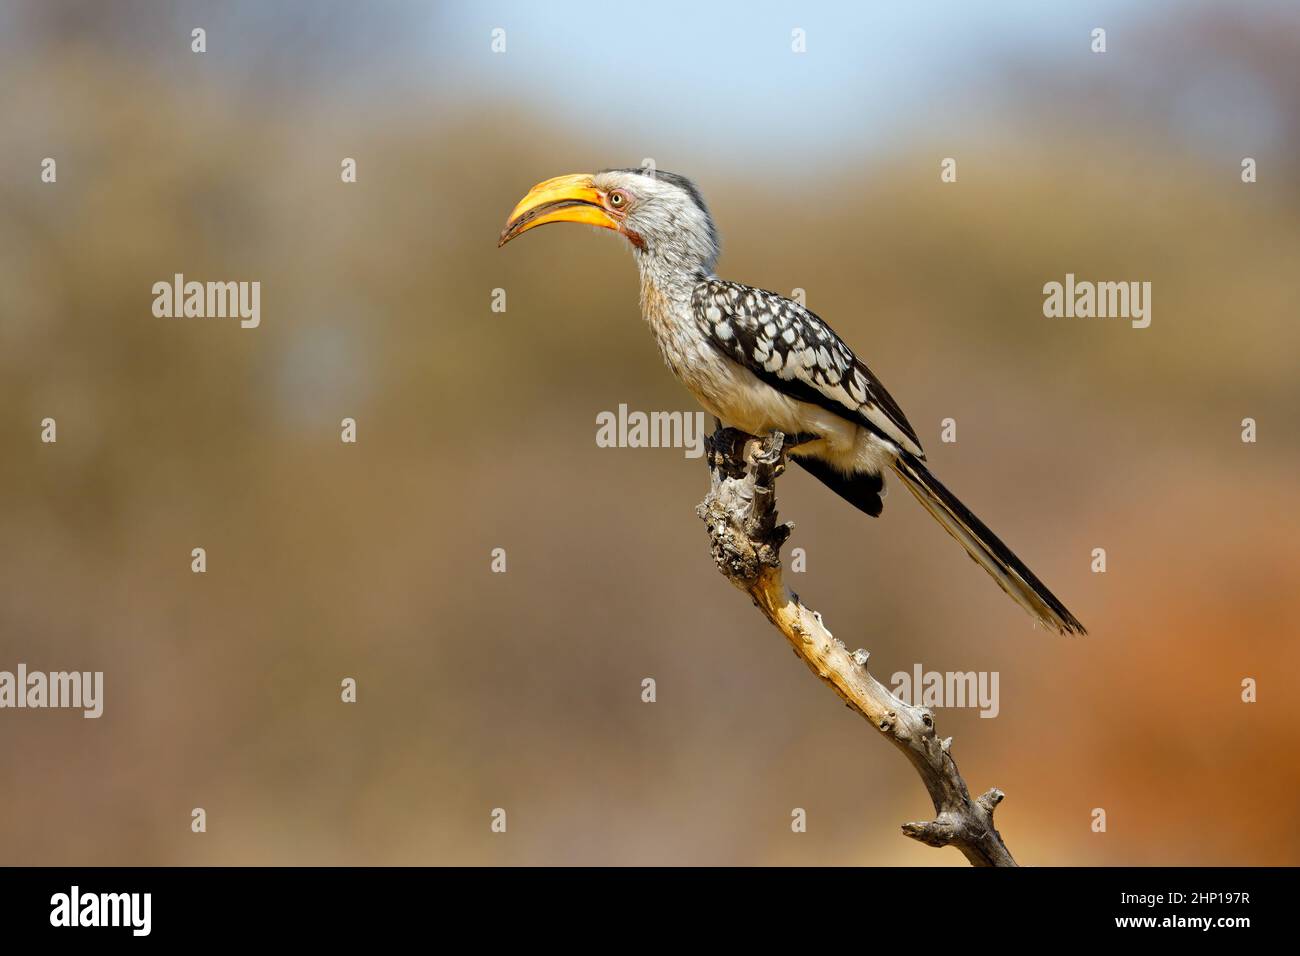 A yellow-billed hornbill (Tockus flavirostris) perched on a branch, South Africa Stock Photo